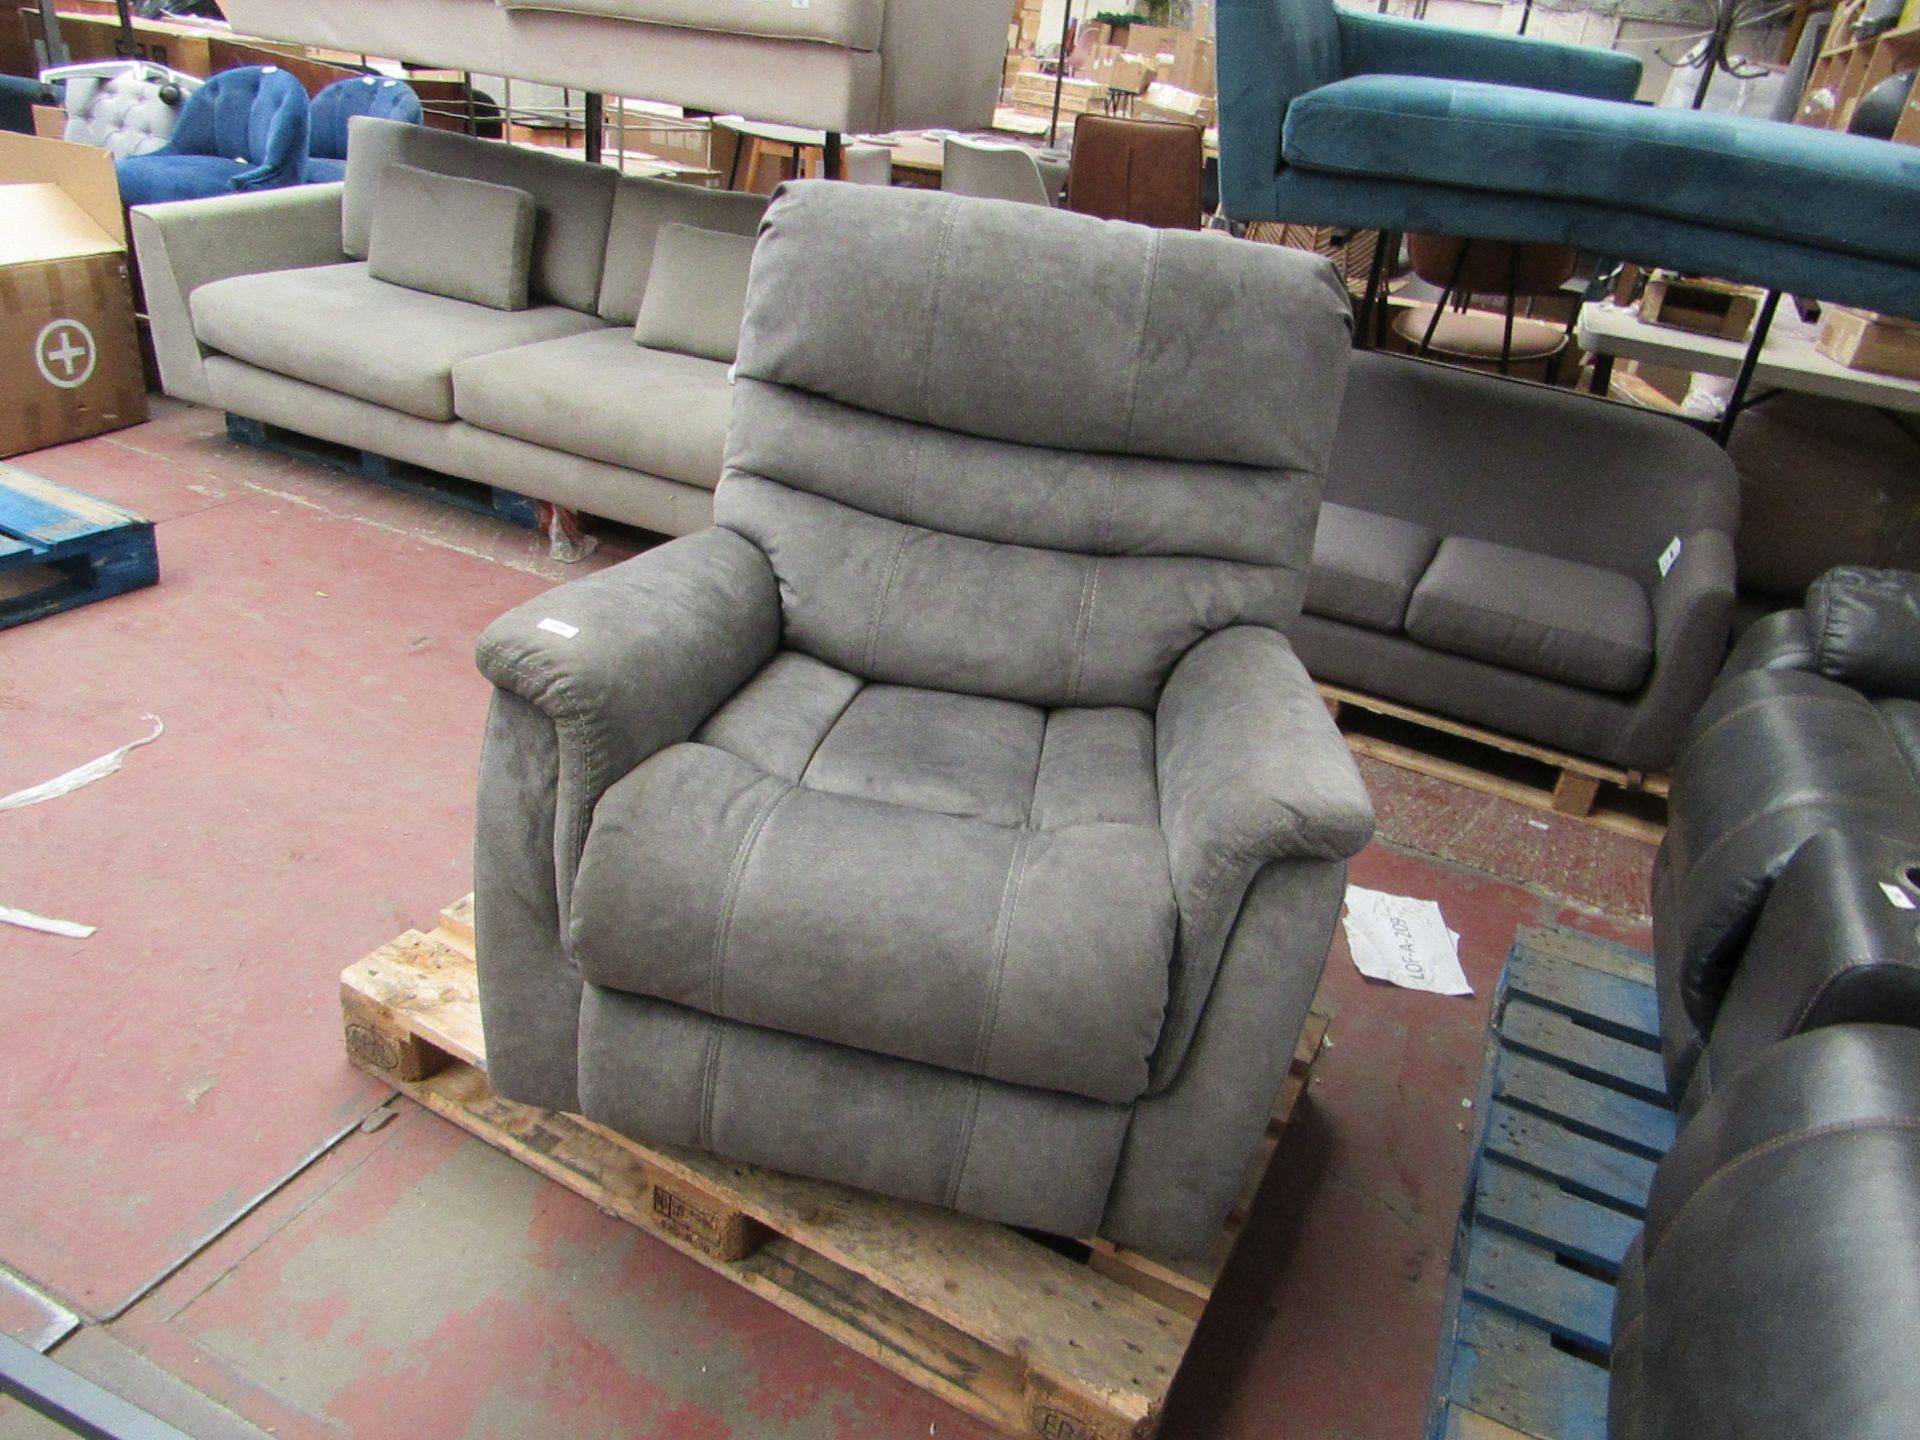 | 1X | THOMASVILLE LAZY BOY ARM CHAIR | SOFT GREY BENSON LEATHER | UNCHECKED & NO BOX | RRP |